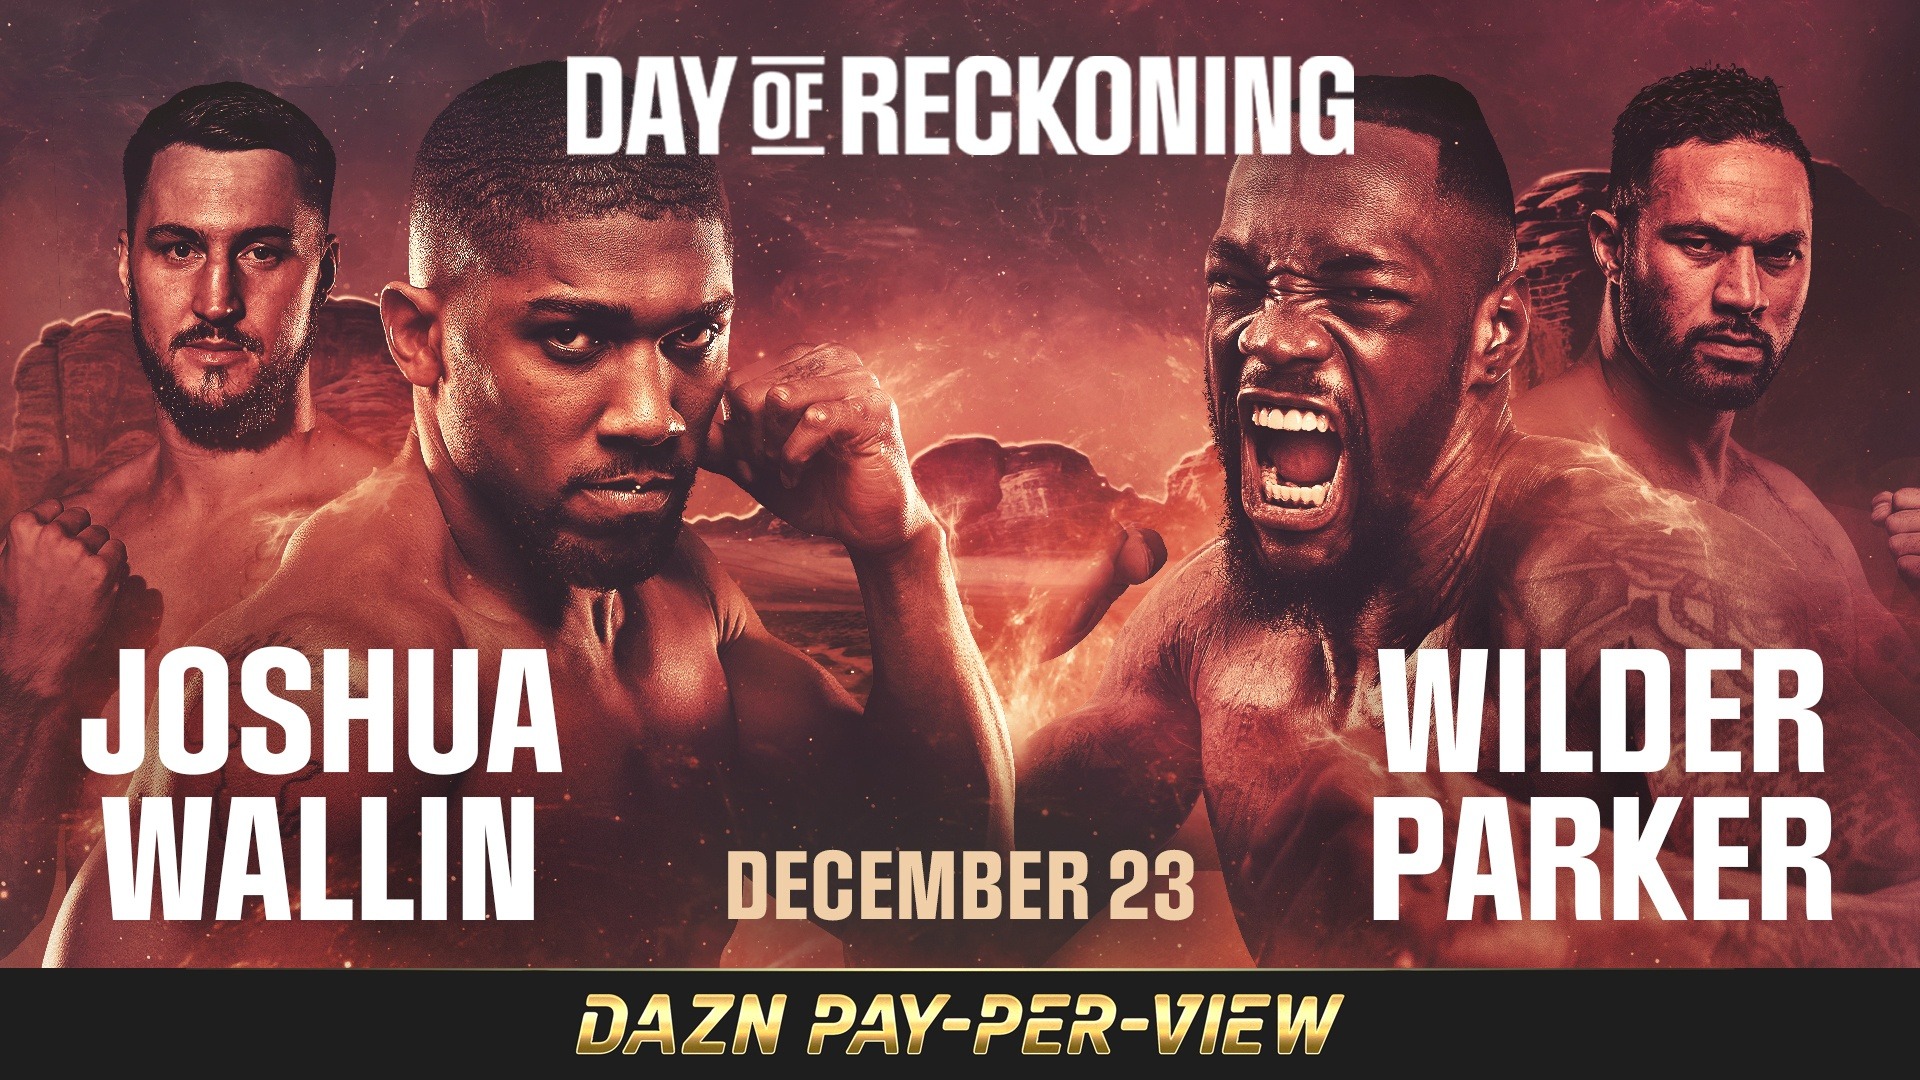 Anthony Joshua and Deontay Wilder on a Day of Reckoning promo poster.